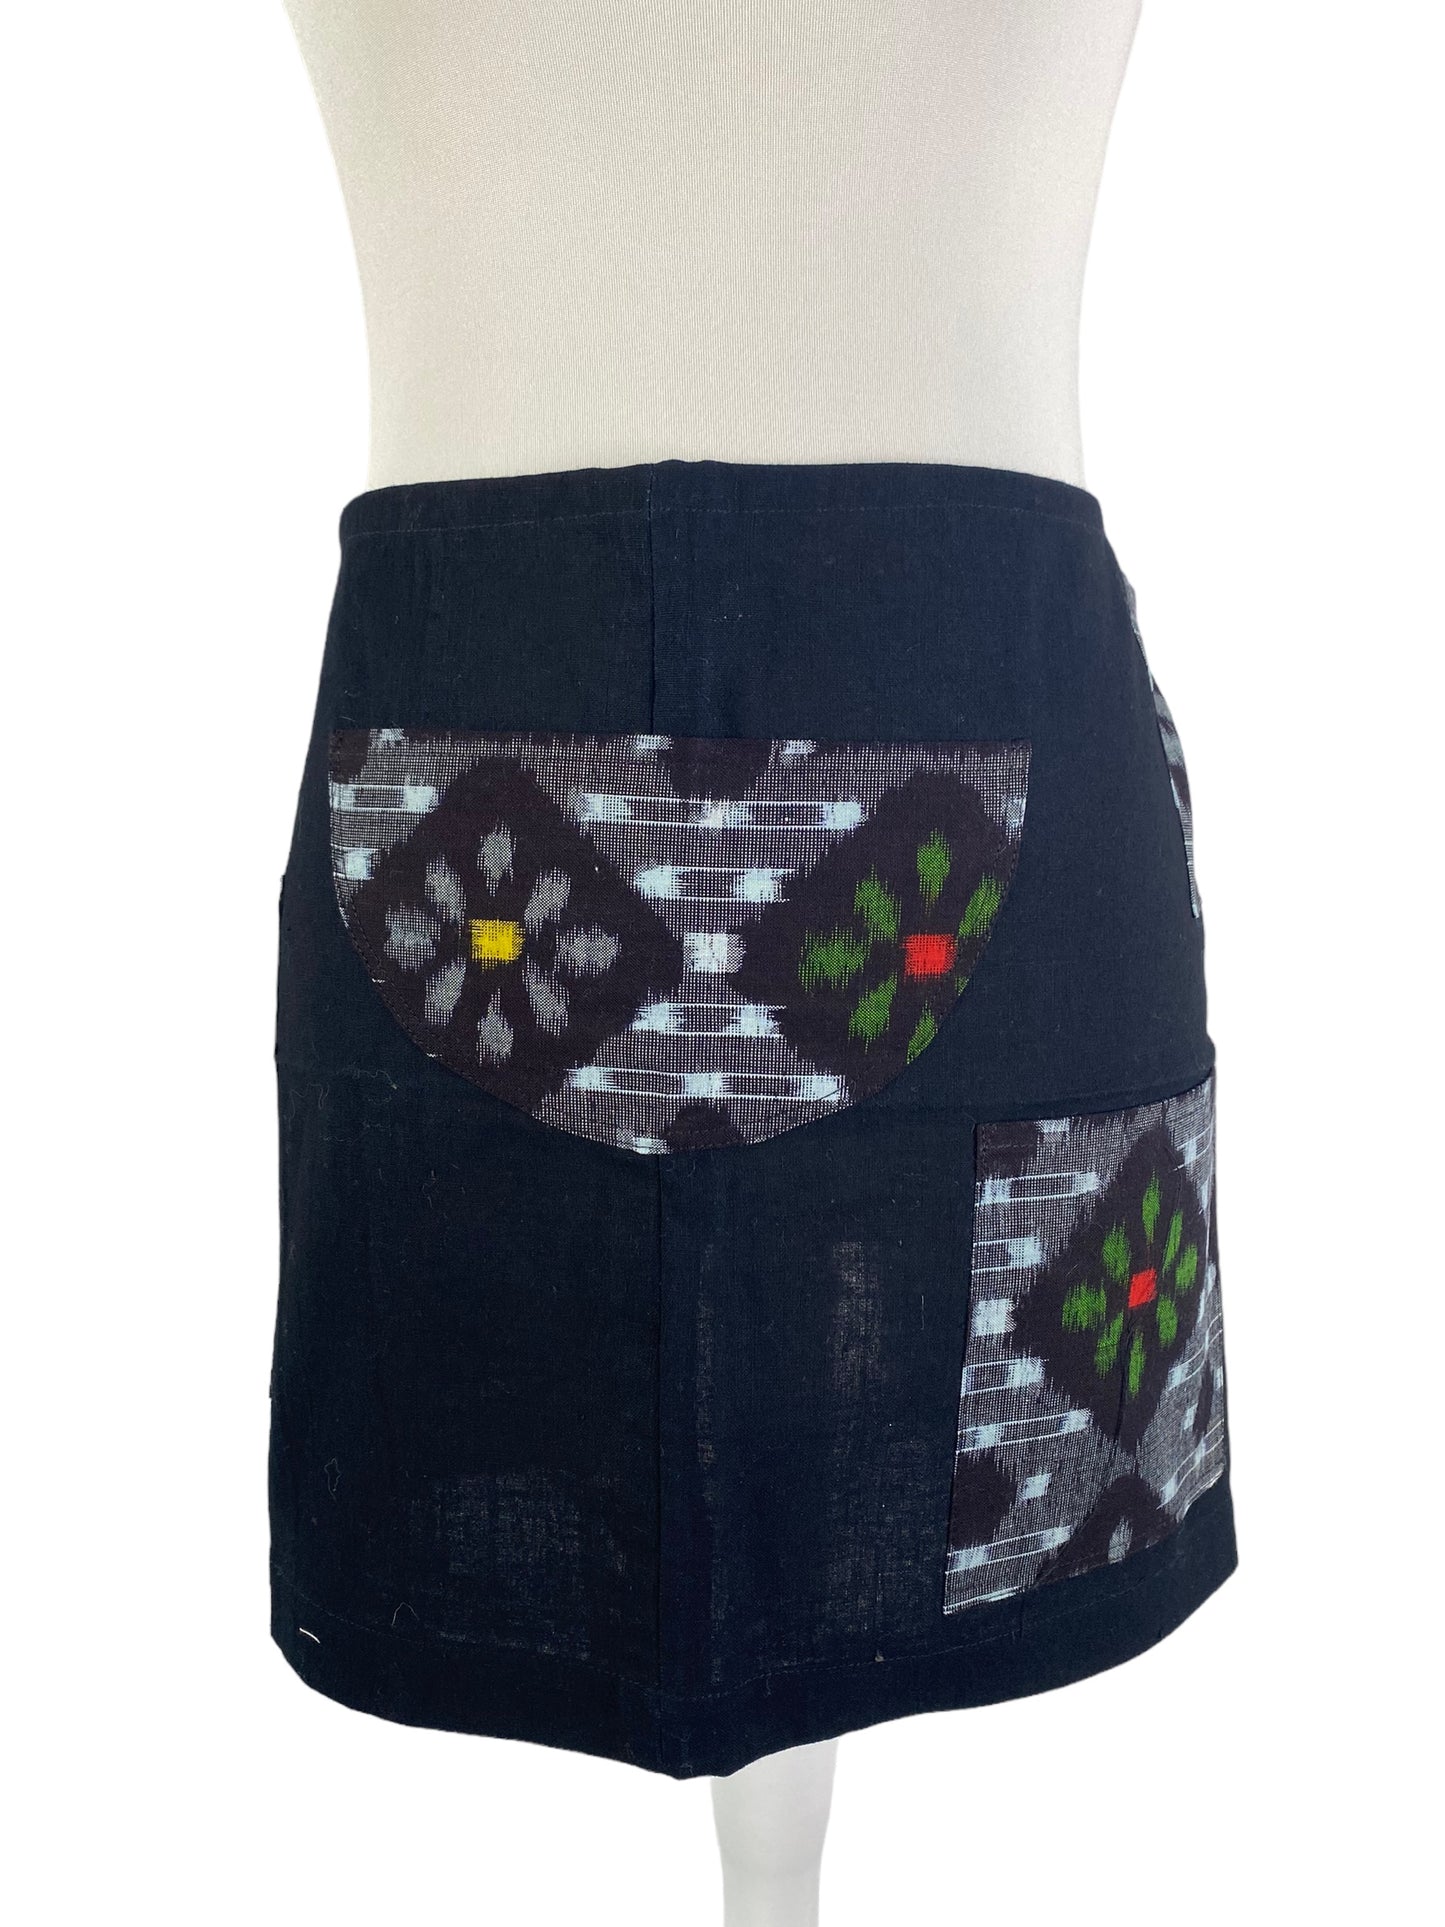 Japanese apron with four pockets.